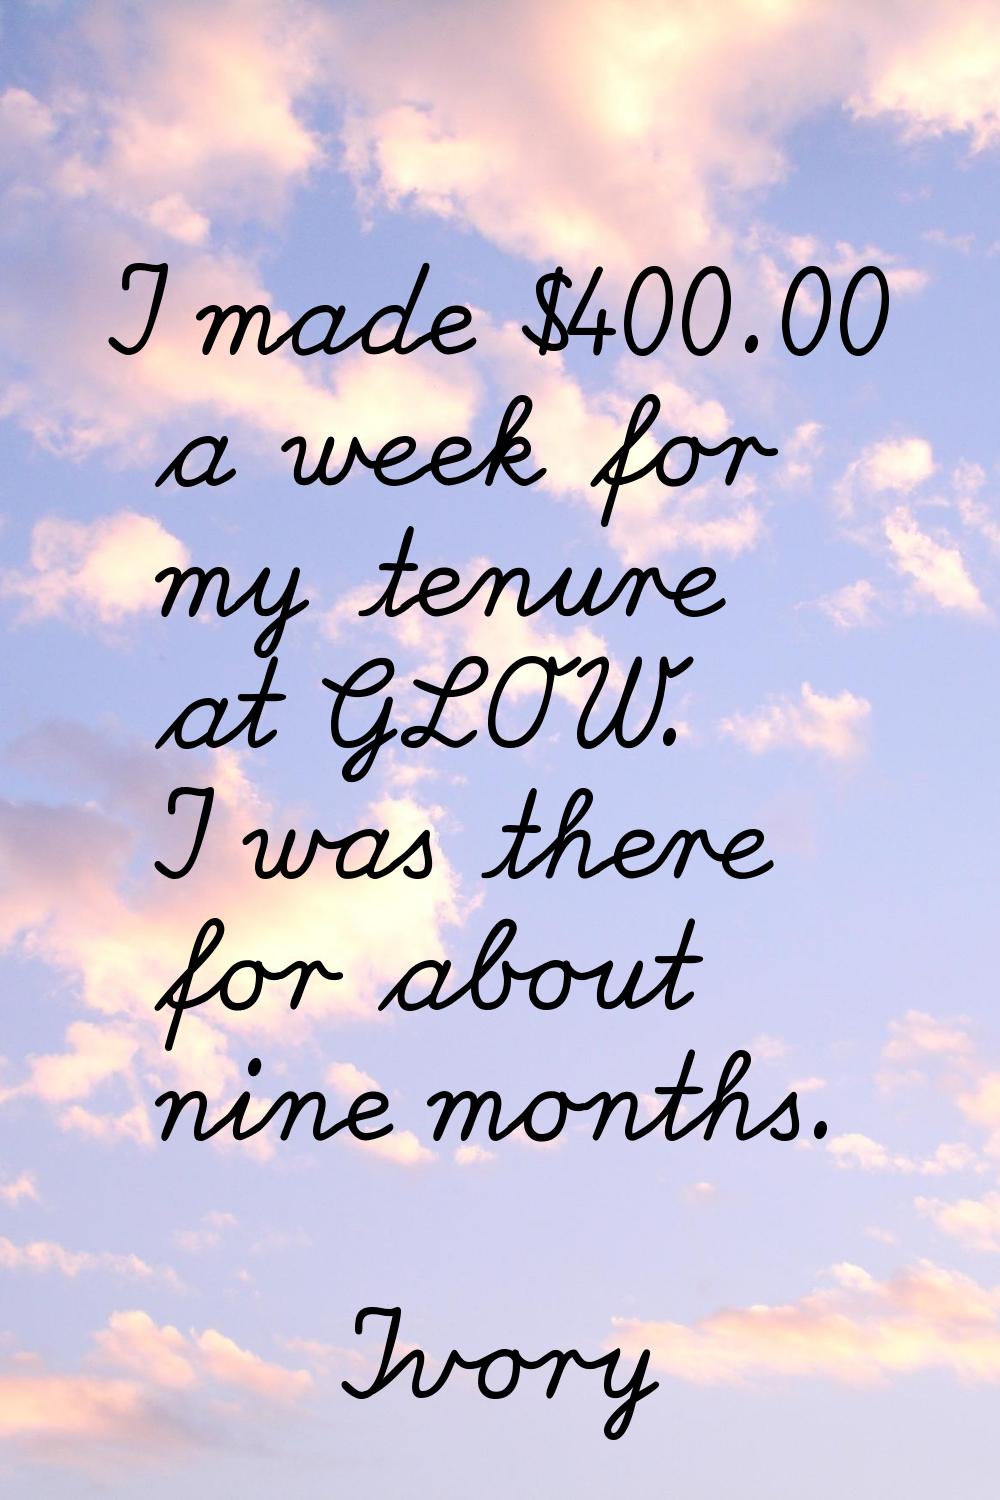 I made $400.00 a week for my tenure at GLOW. I was there for about nine months.